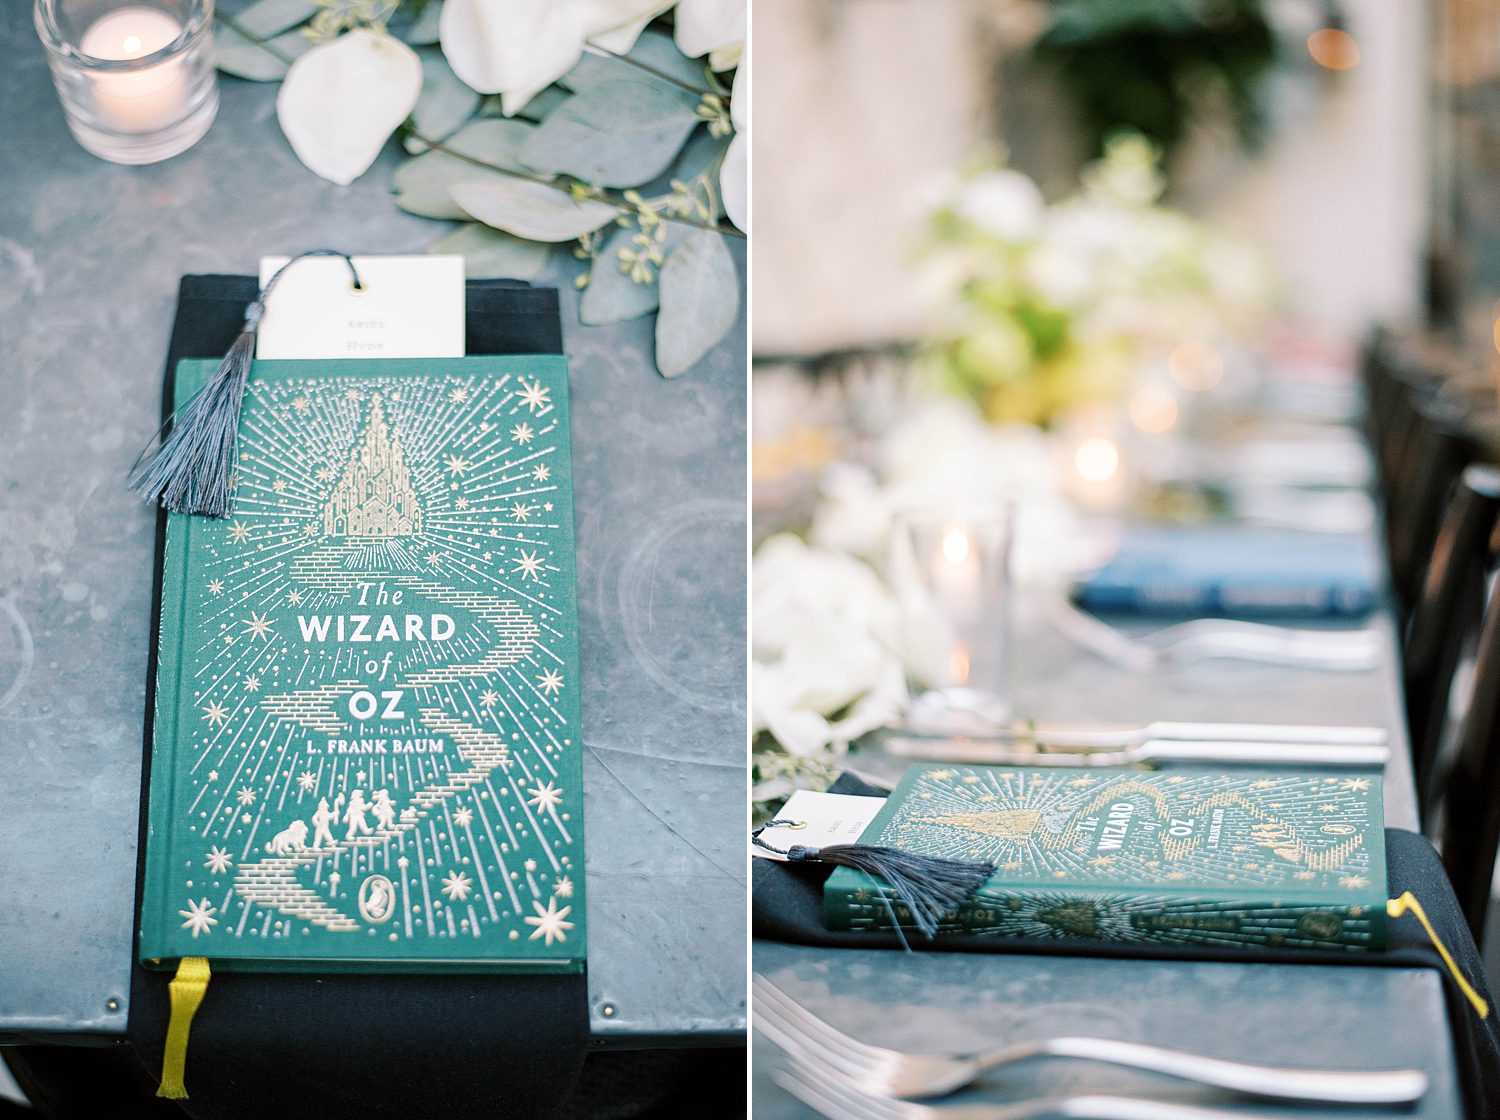 antique books at place settings for Oxford Exchange wedding reception